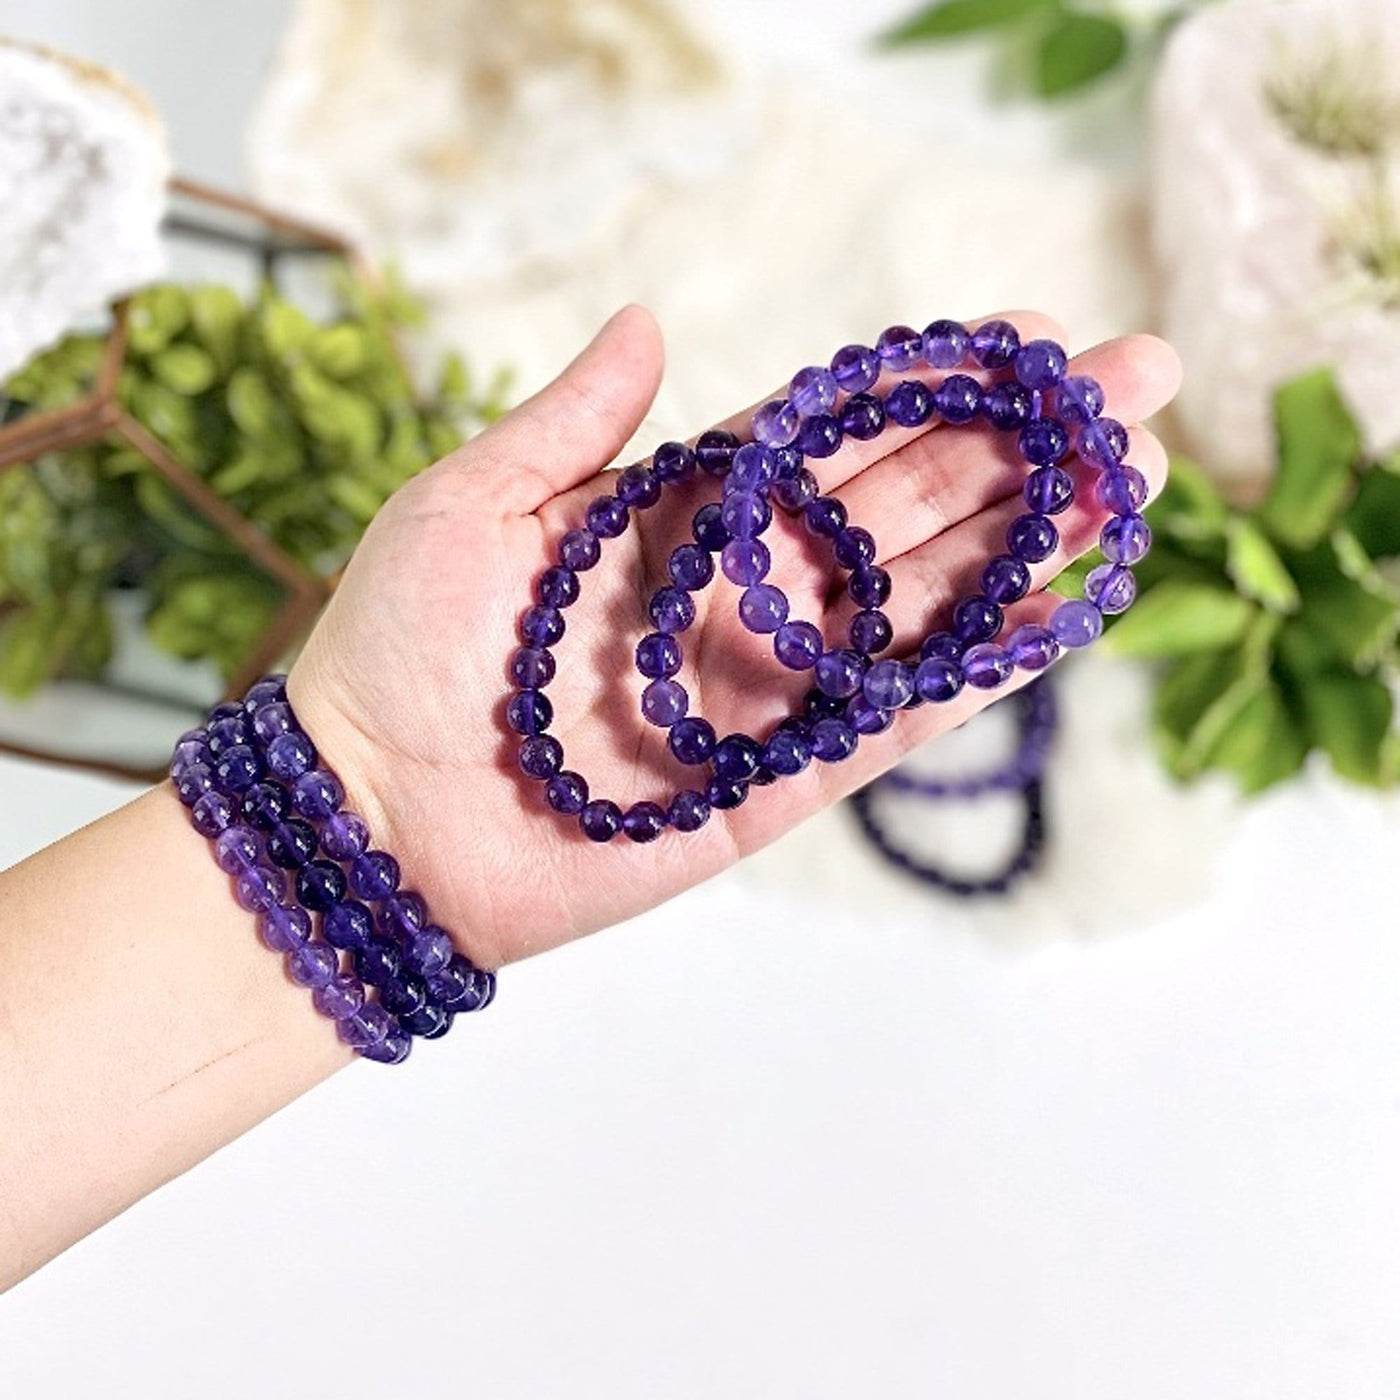 Amethyst gemstone bracelets.  Three are on a woman's wrist and three are held in her hand.